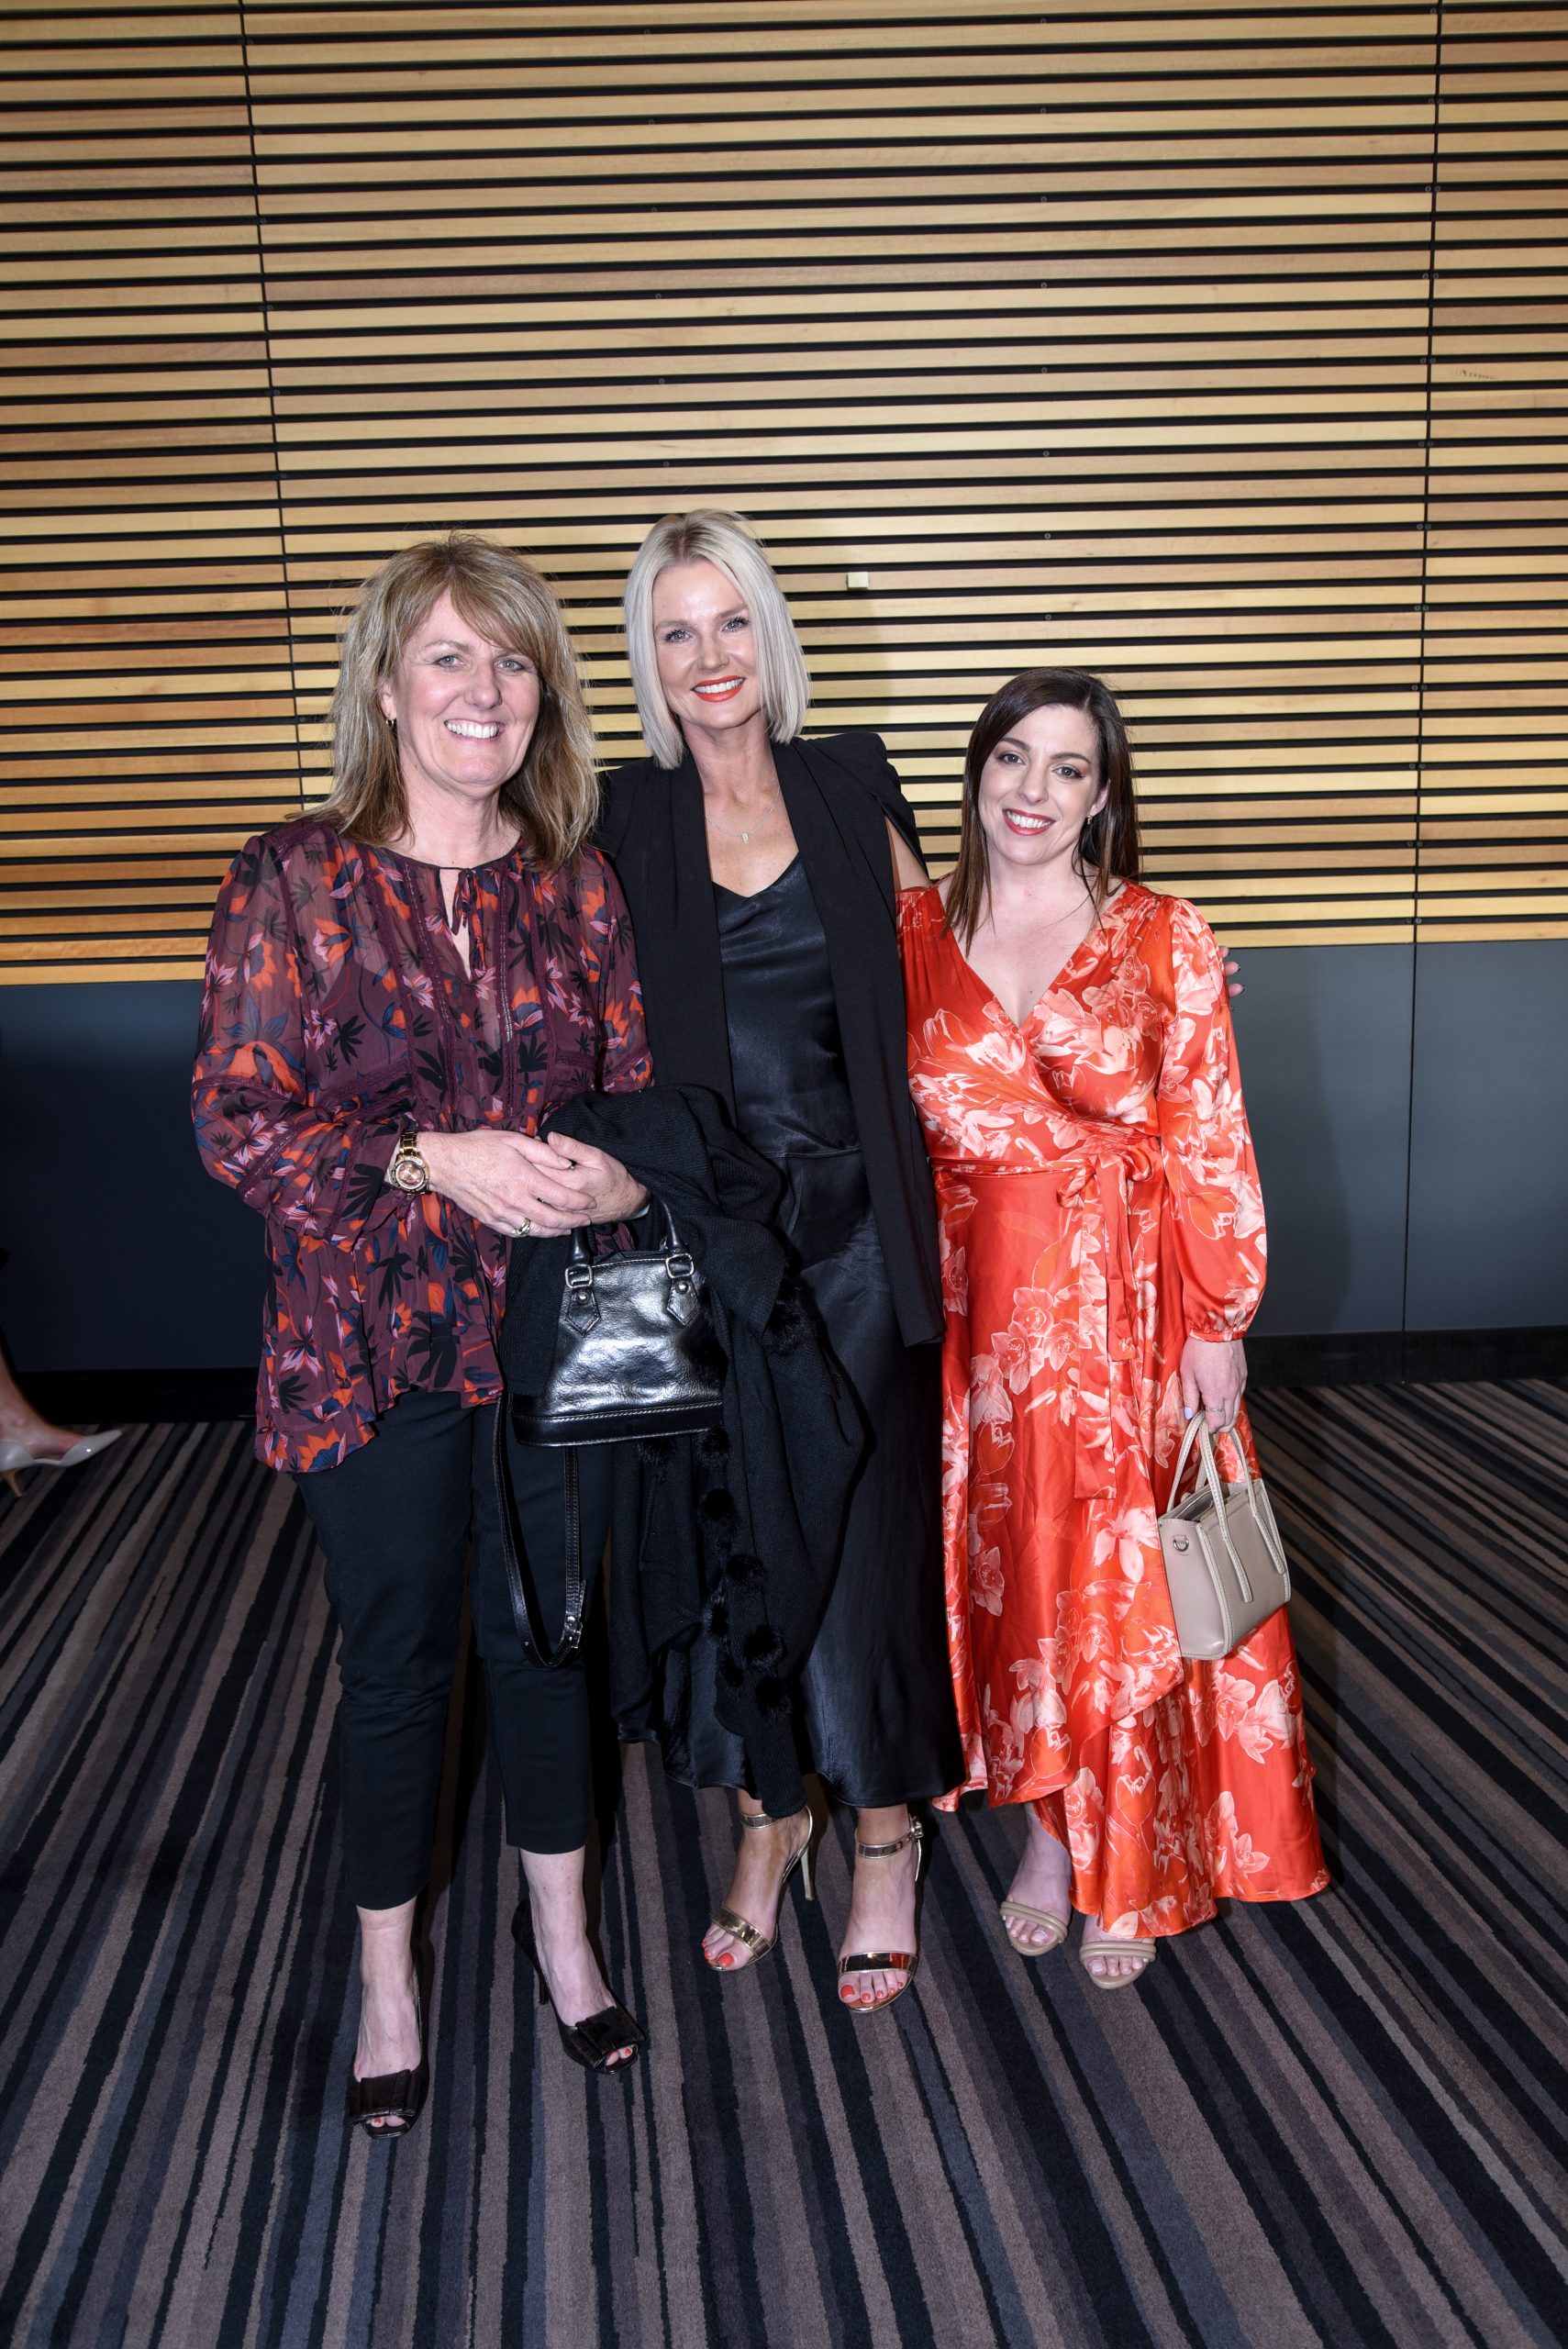 2022 Gala Dinner Image Gallery - Tourism Industry Council SA